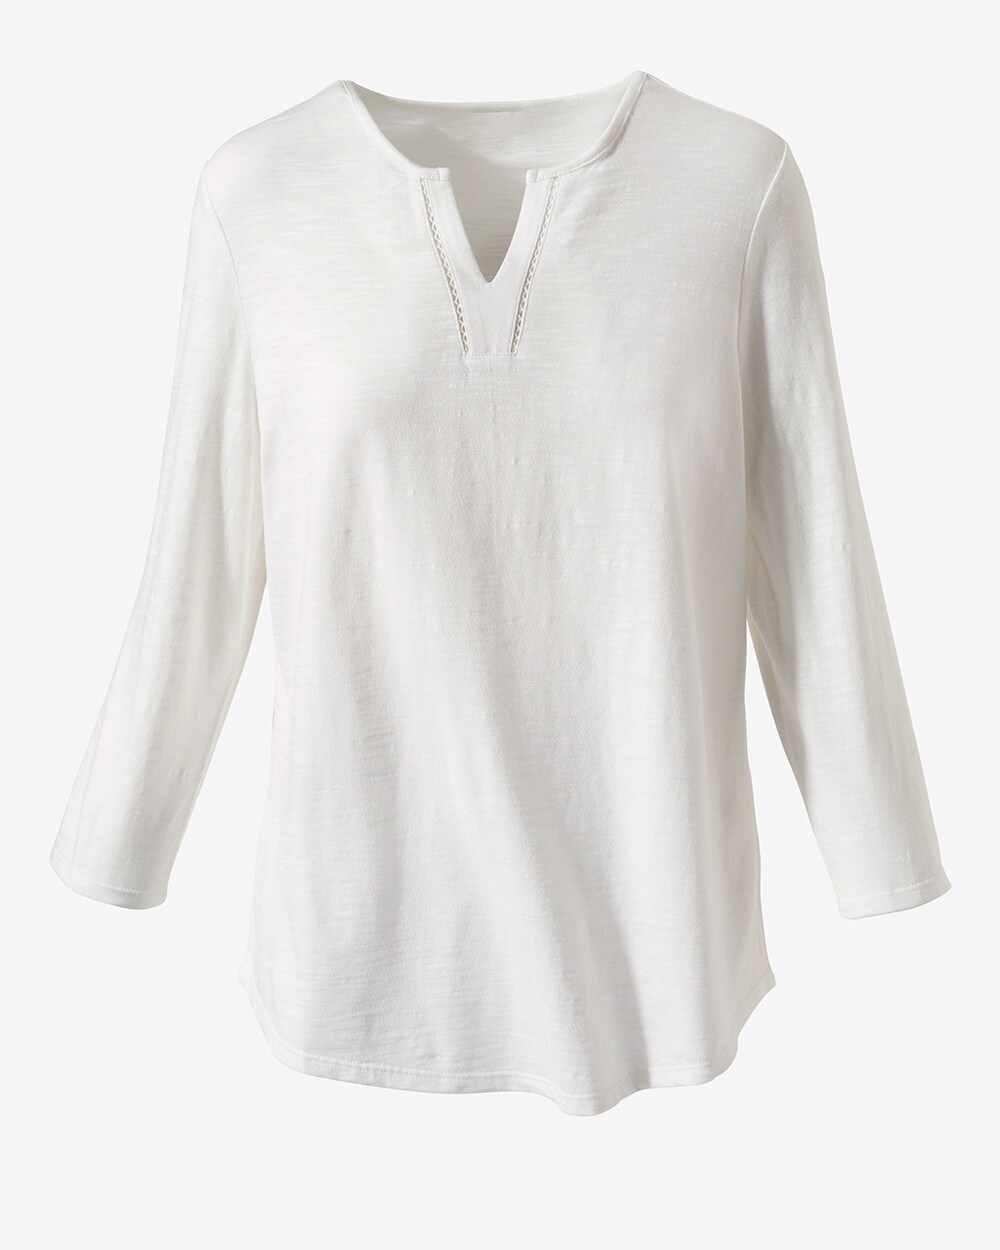 Detailed Notch-Neck 3/4-Sleeve Top